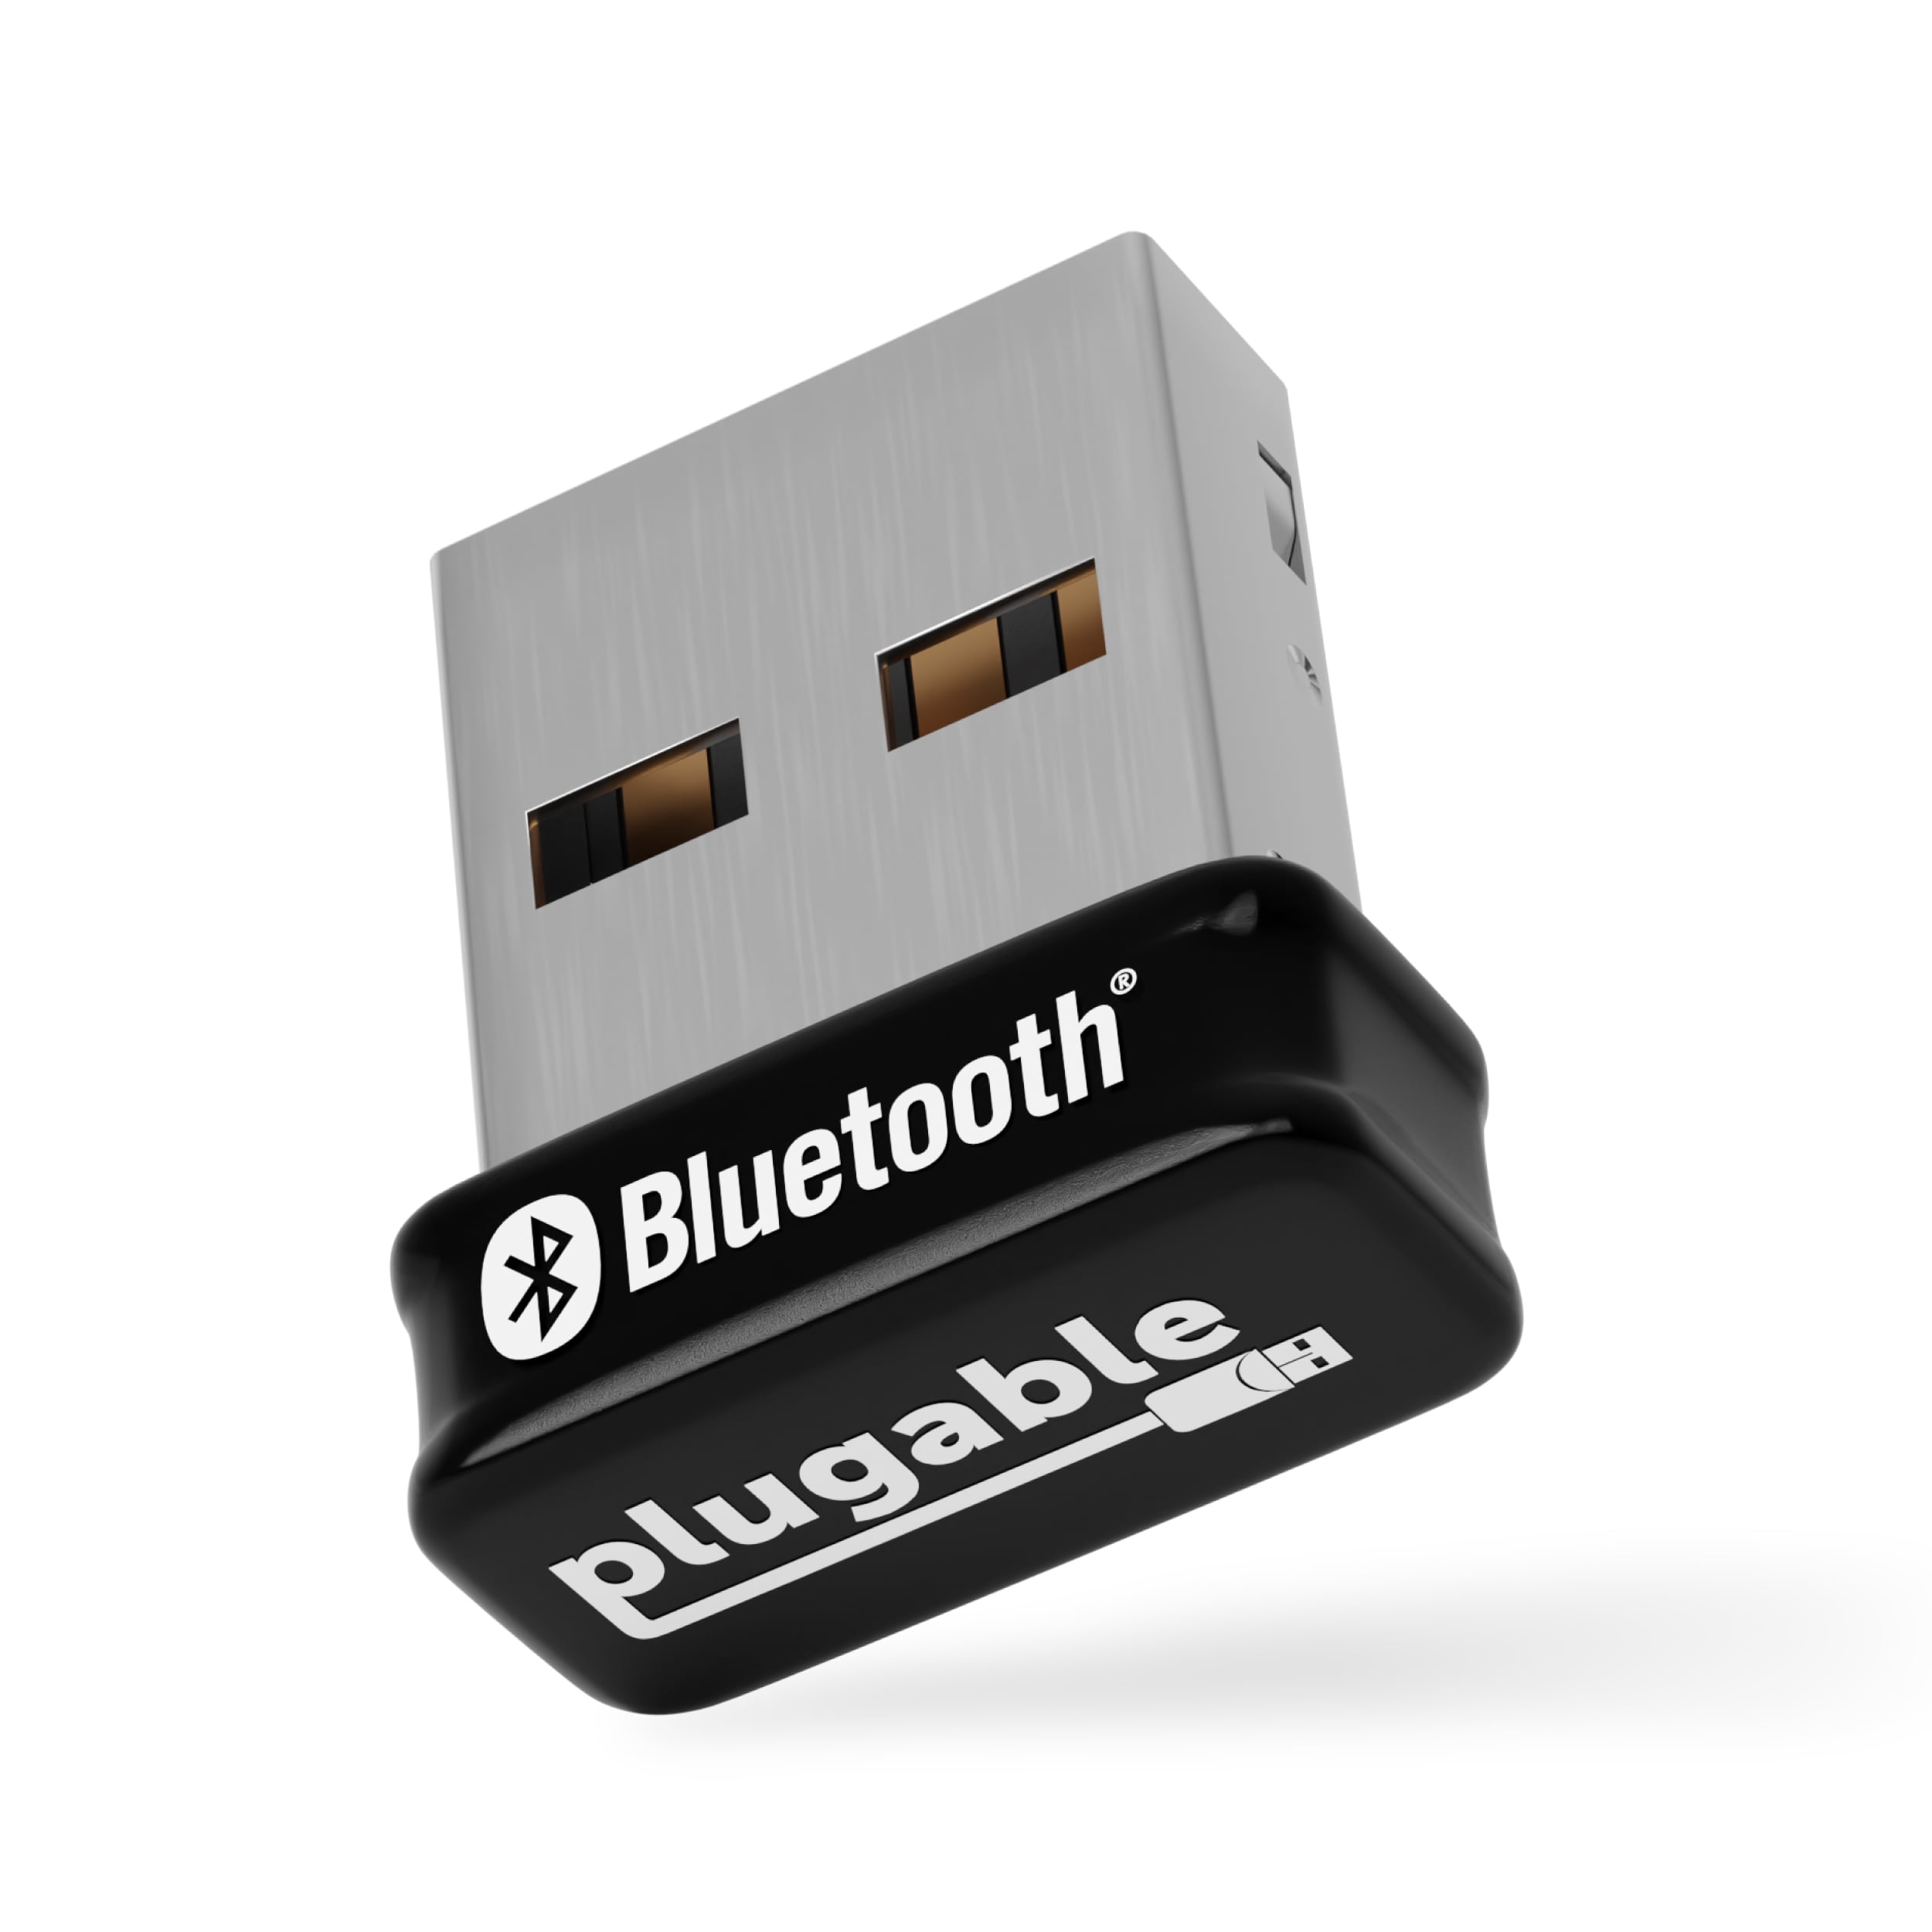 Plugable USB Bluetooth Adapter for PC, Bluetooth 5.0 Dongle Compatible with  Windows, Add 7 Devices: Headphones, Speakers, Keyboard, Mouse, Printer and